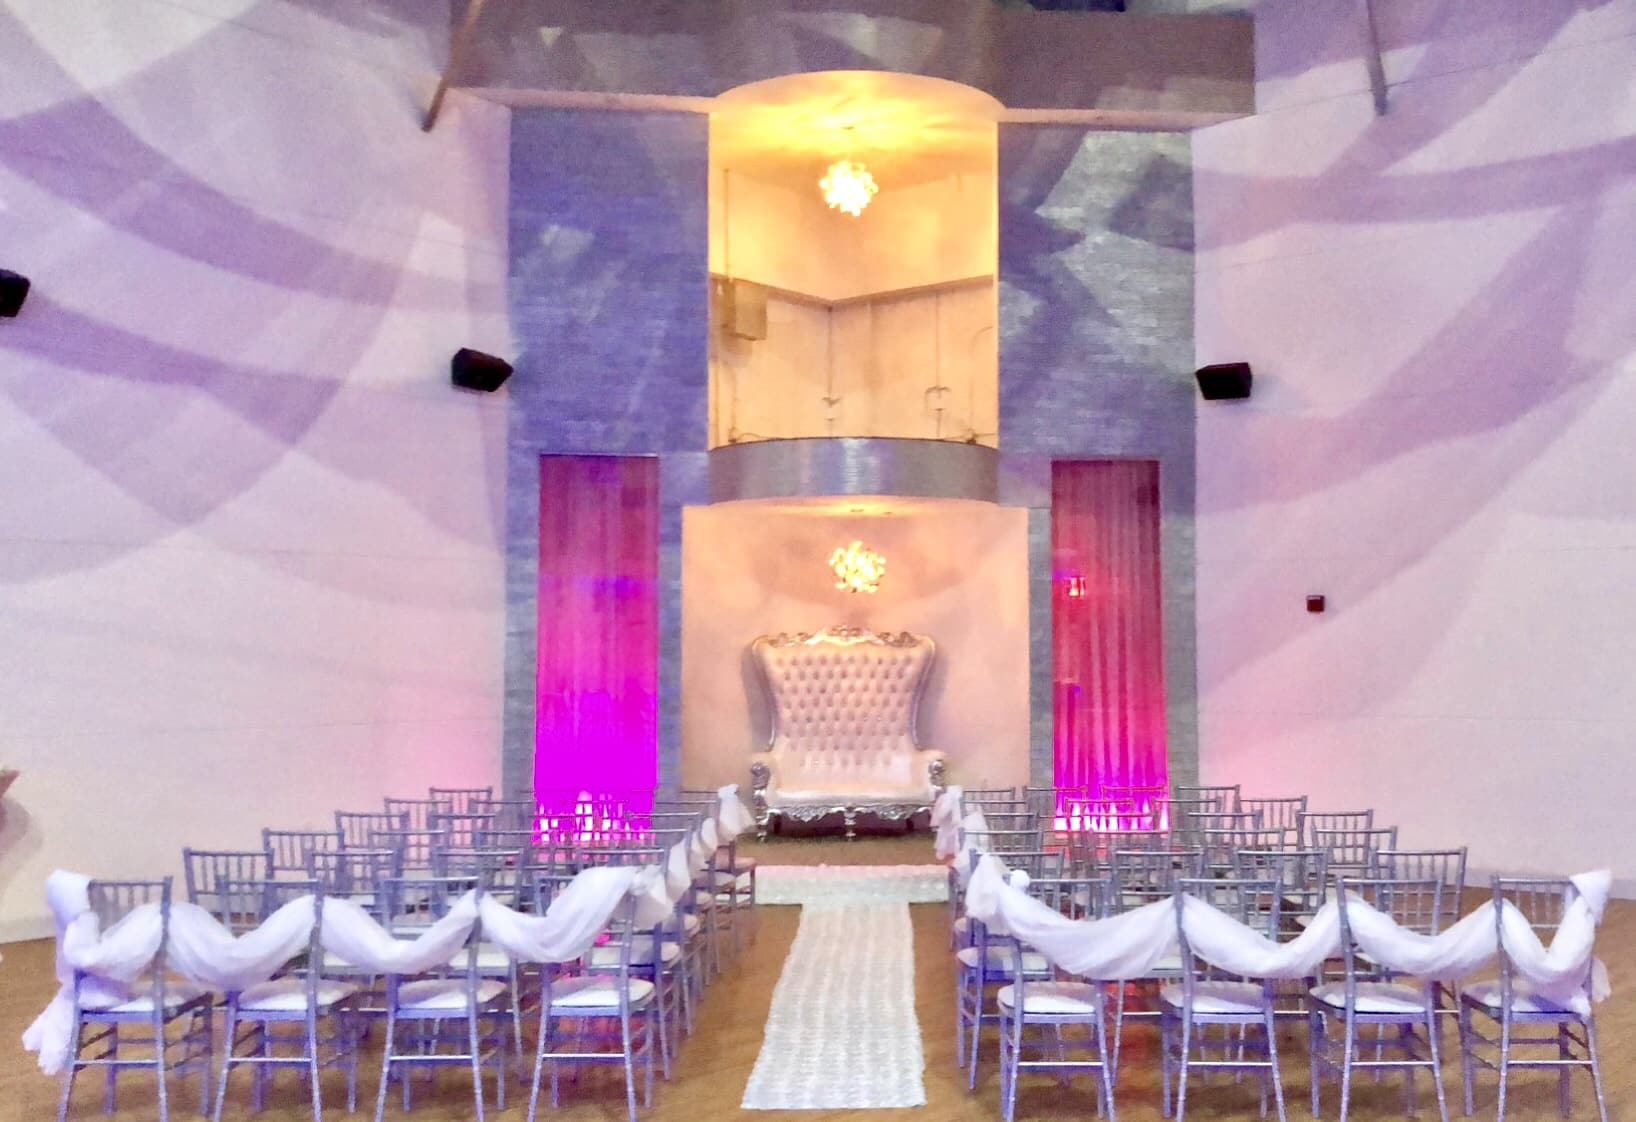 The Palace - wedding ceremony location with stunning architectural backdrop